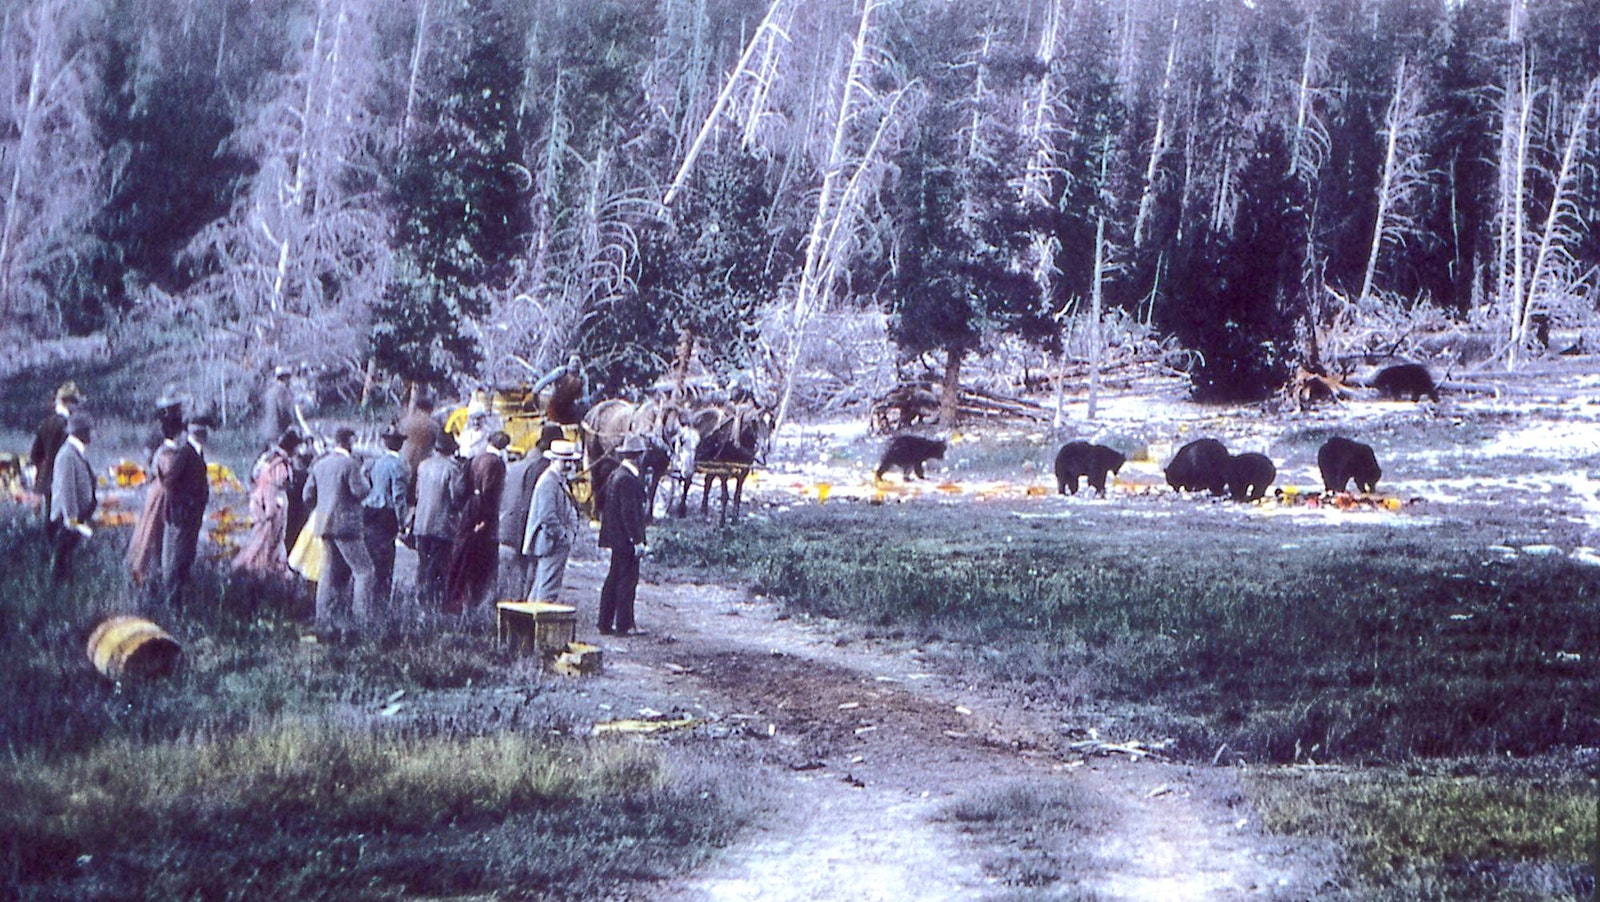 Visitors watch bears eat trash in the early 1900s.